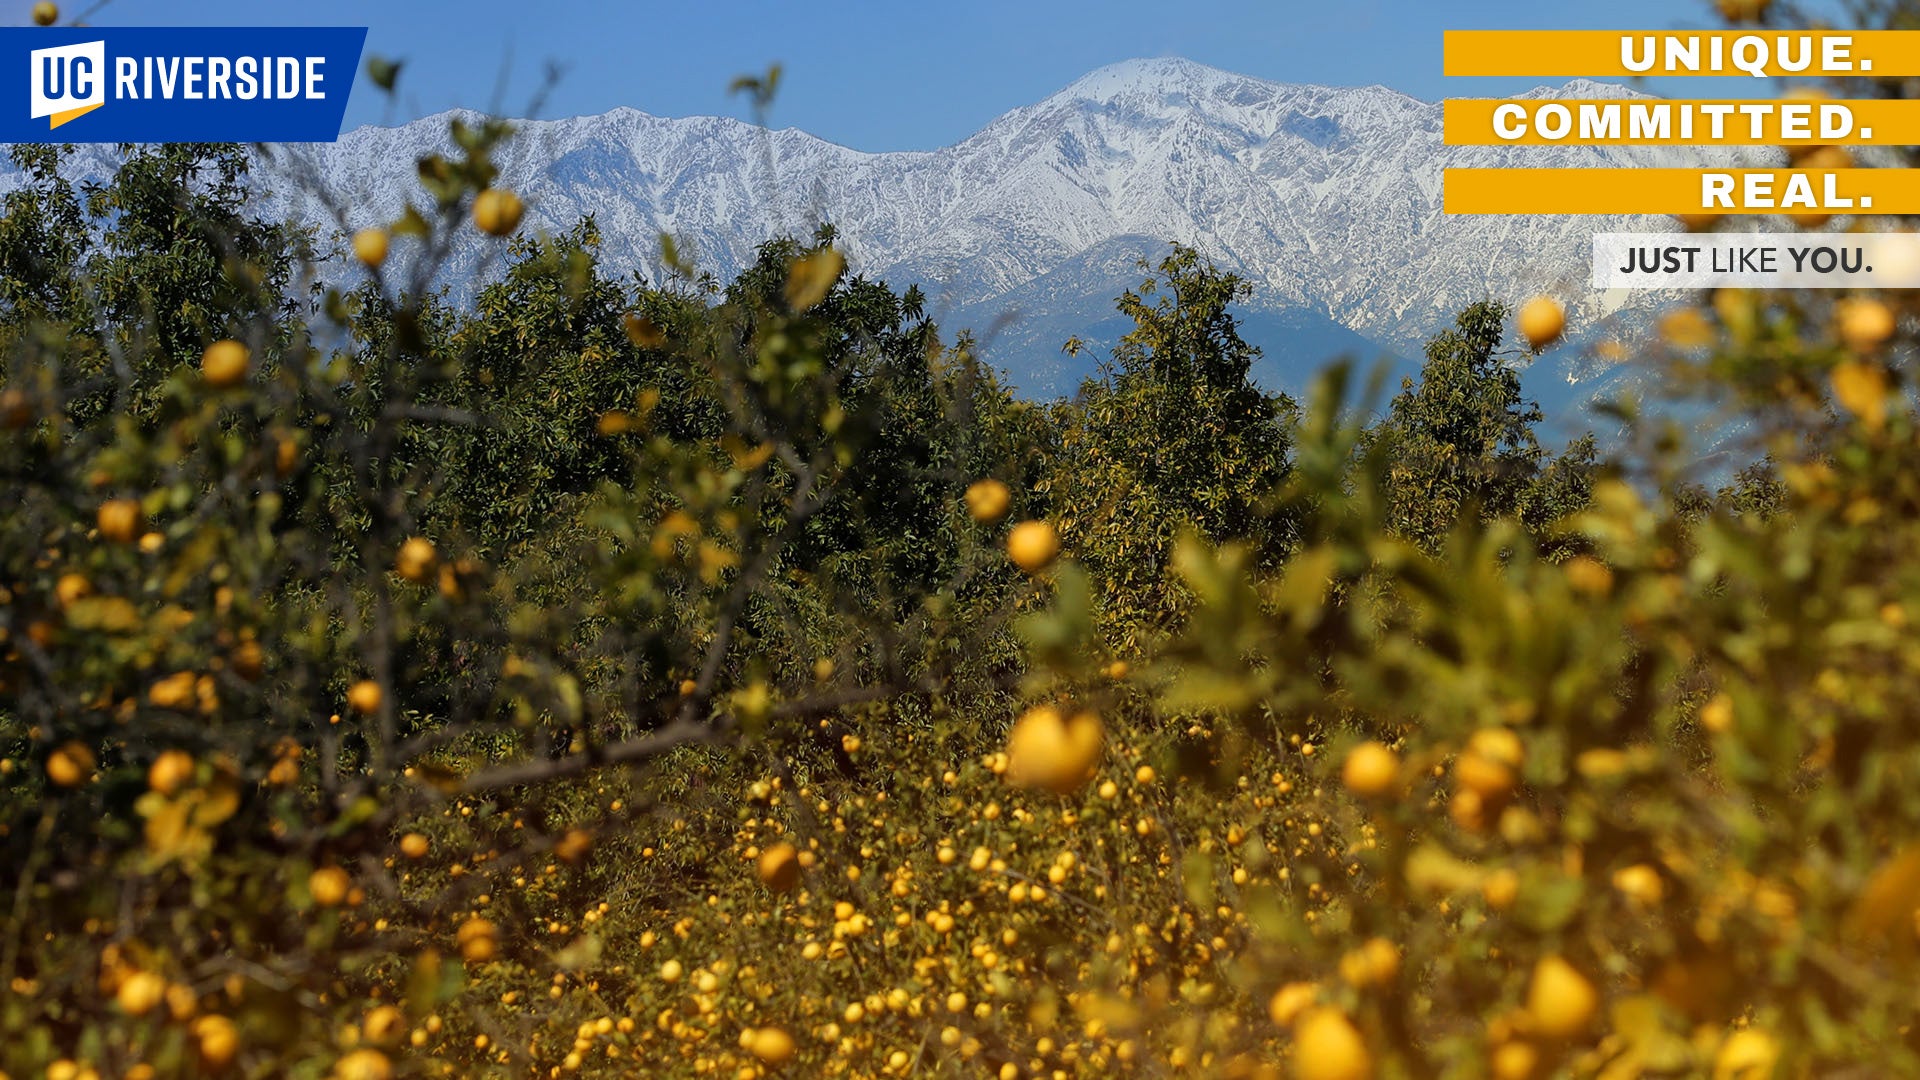 Download: UC Riverside Zoom Background - UCR Orange Groves and Mountains.